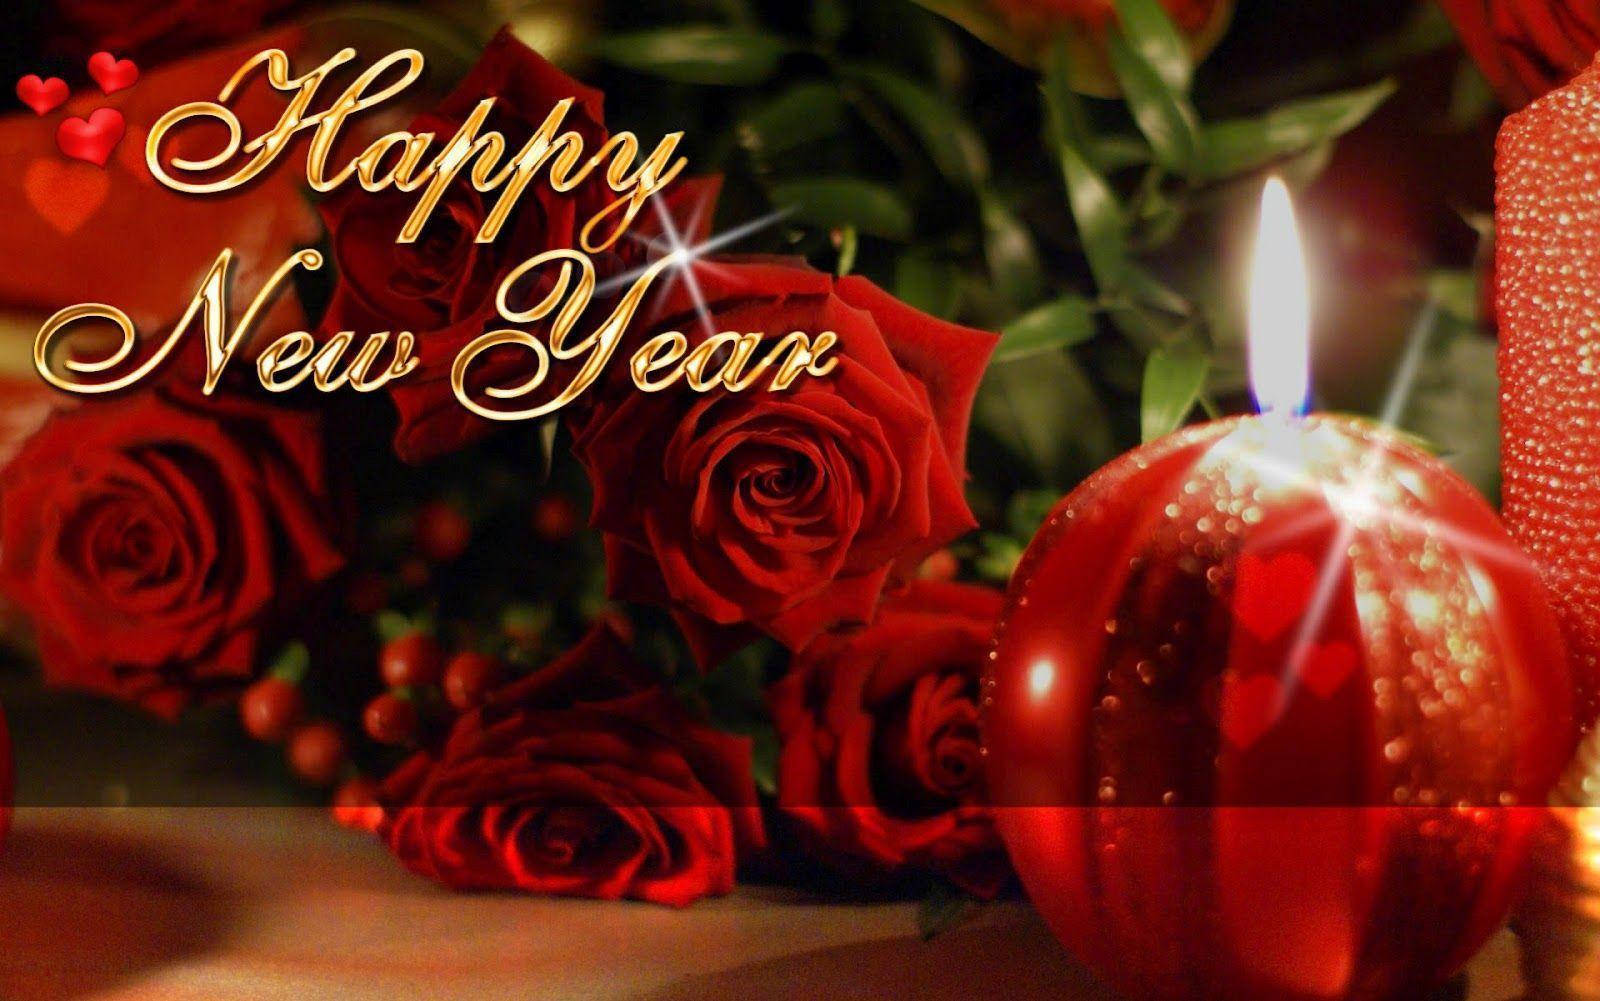 Happy New Year 2021 Greeting With Red Roses Wallpaper